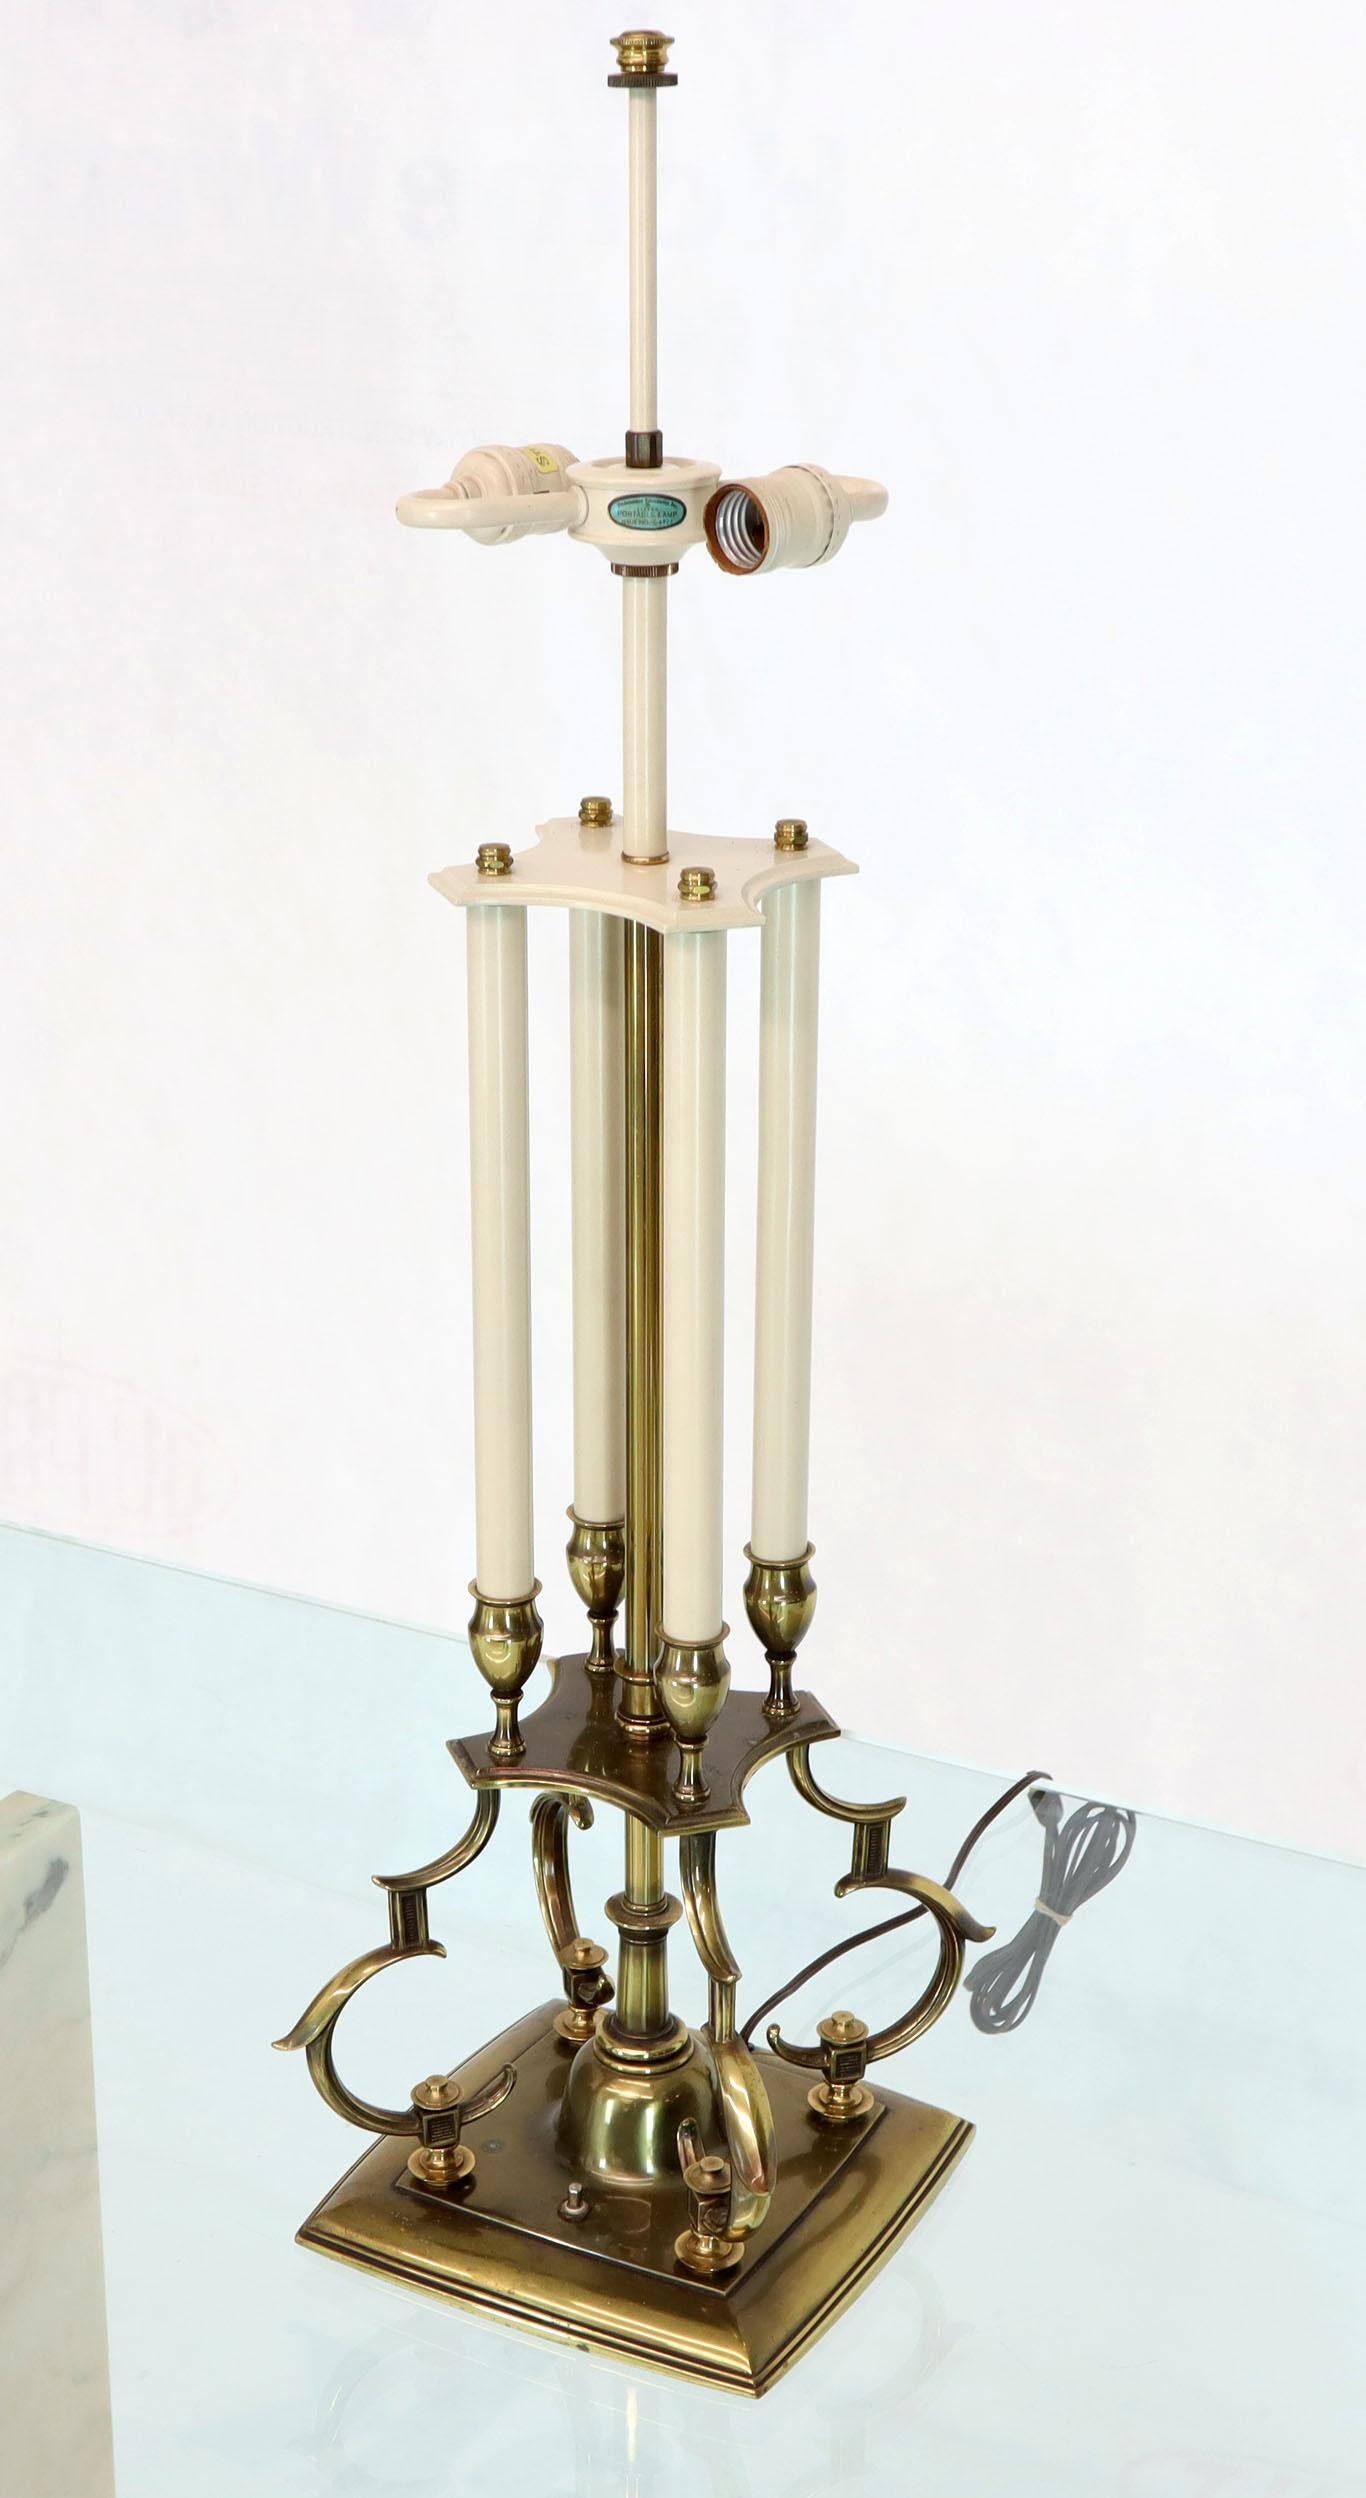 Polished Pair of Large Figural Brass Table Lamps by Stiffel